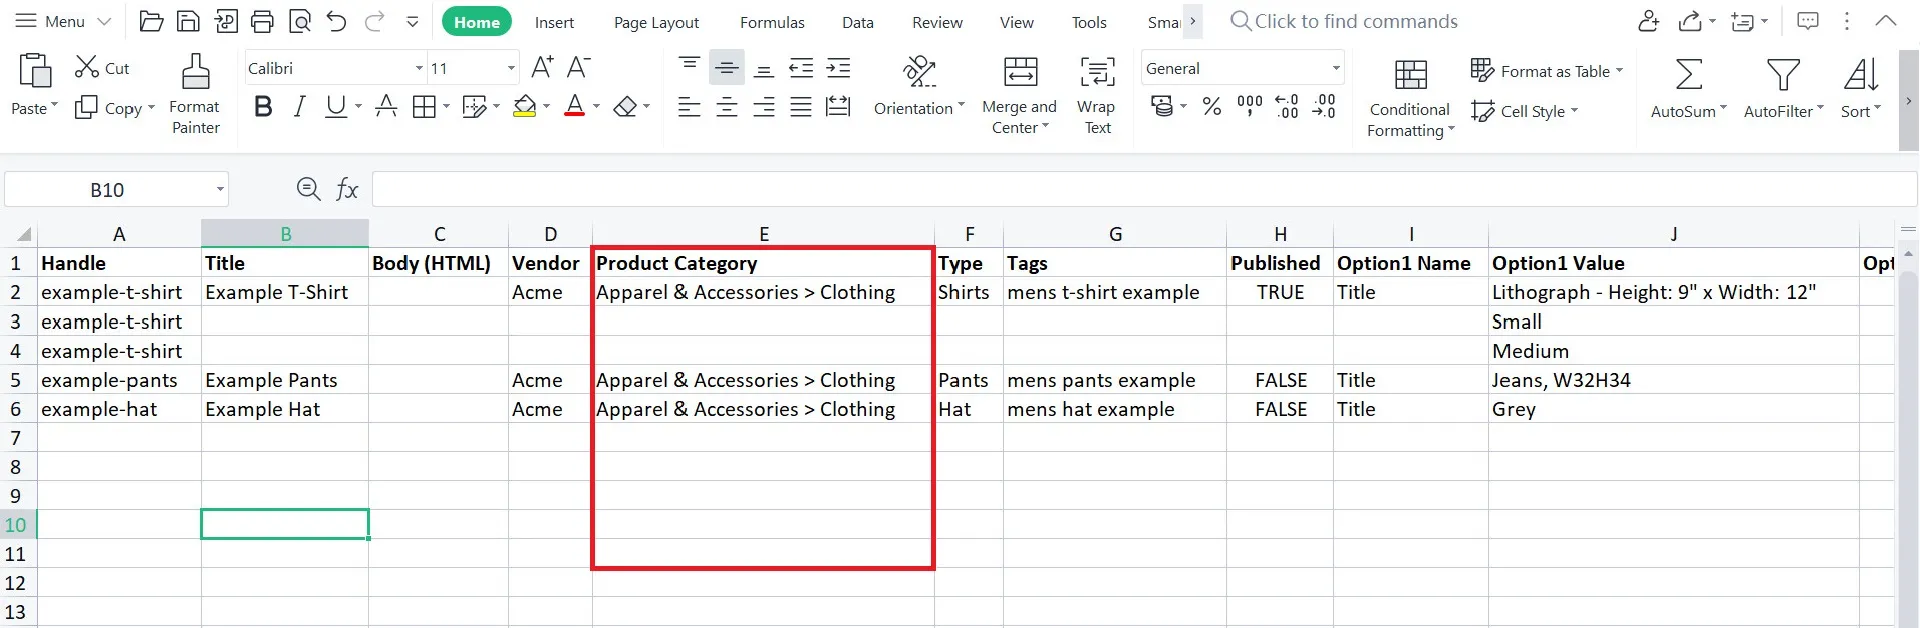 Create a CVS file with Product Category column